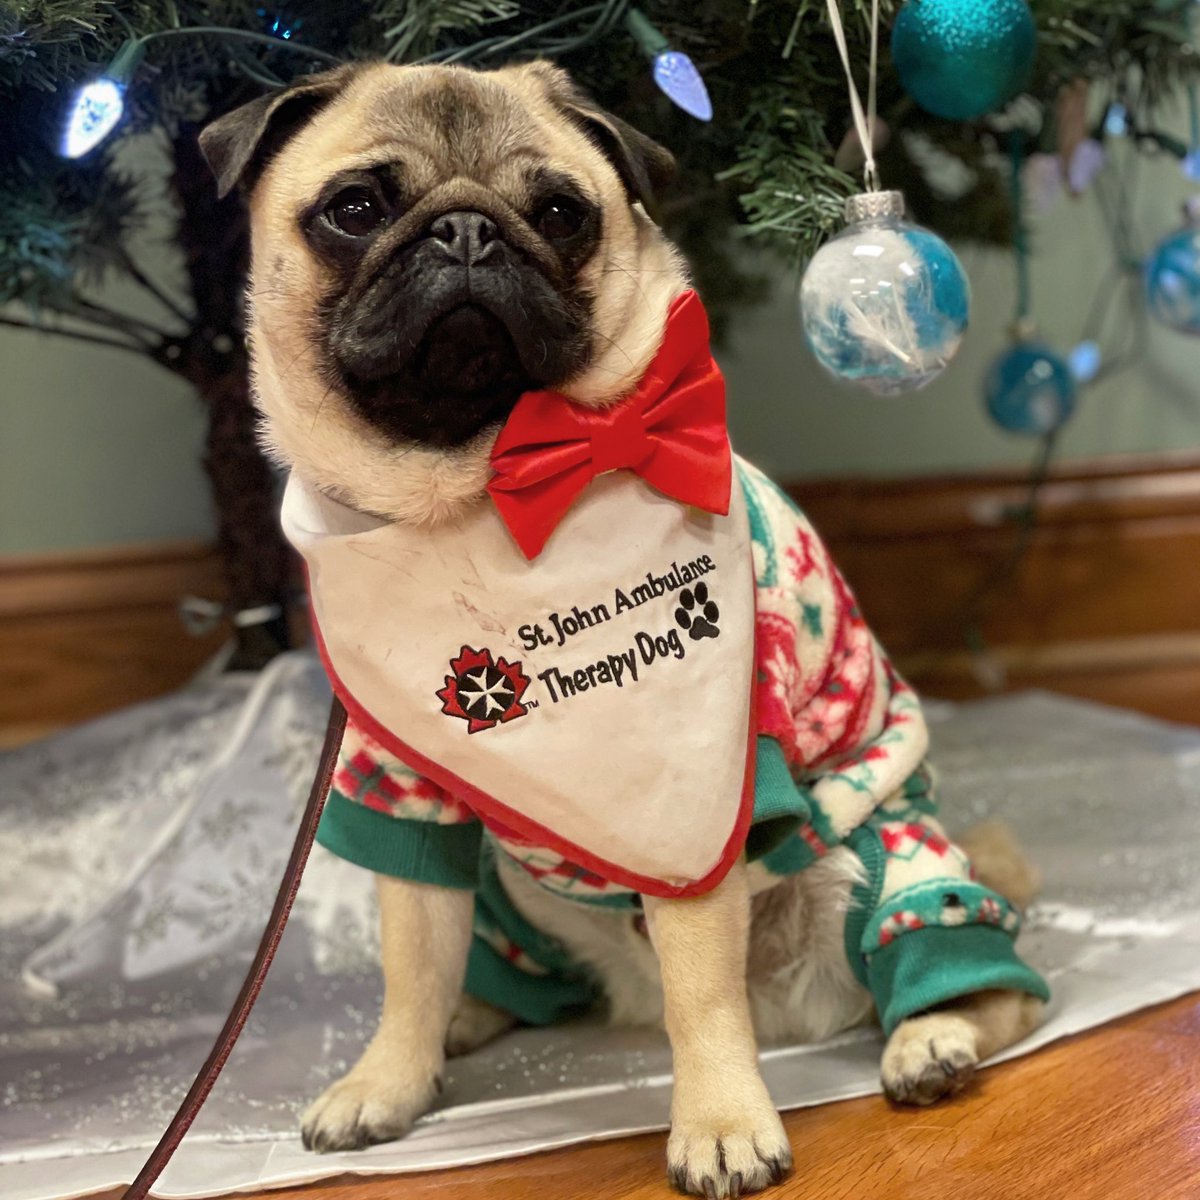 Today was Ugly Jammie Day at #ParkwoodHospital … but … someone forgot to put cookies & milk under the tree🤨 ~ Lil C 

#therapydog 

#pug #Christmas #TisTheSeasonToShowSomeLove #pughugs #ldnont @stjosephslondon